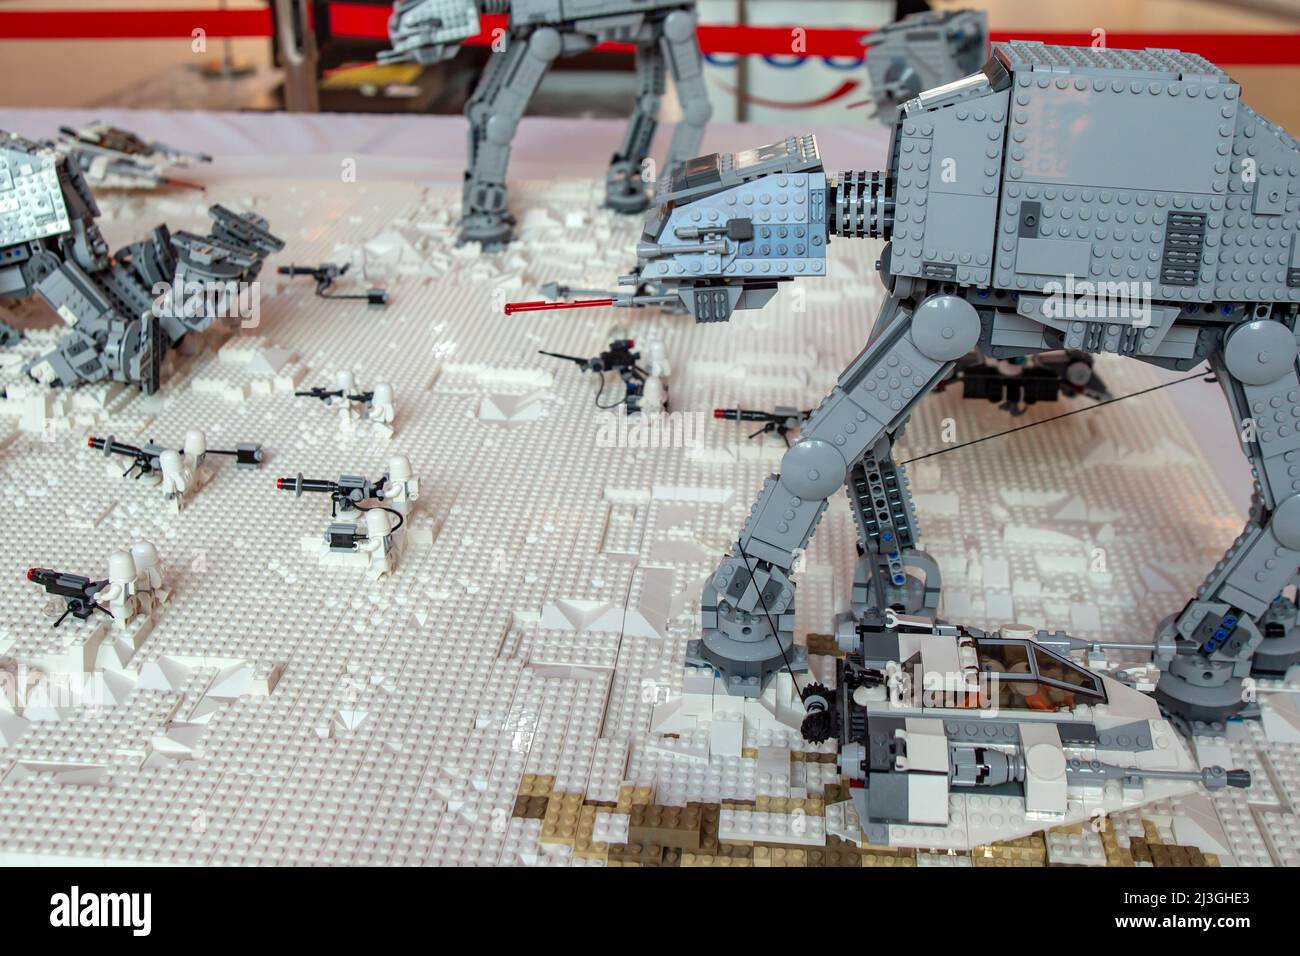 Star wars scene made with little lego bricks at a lego EXEBITION Stock  Photo - Alamy